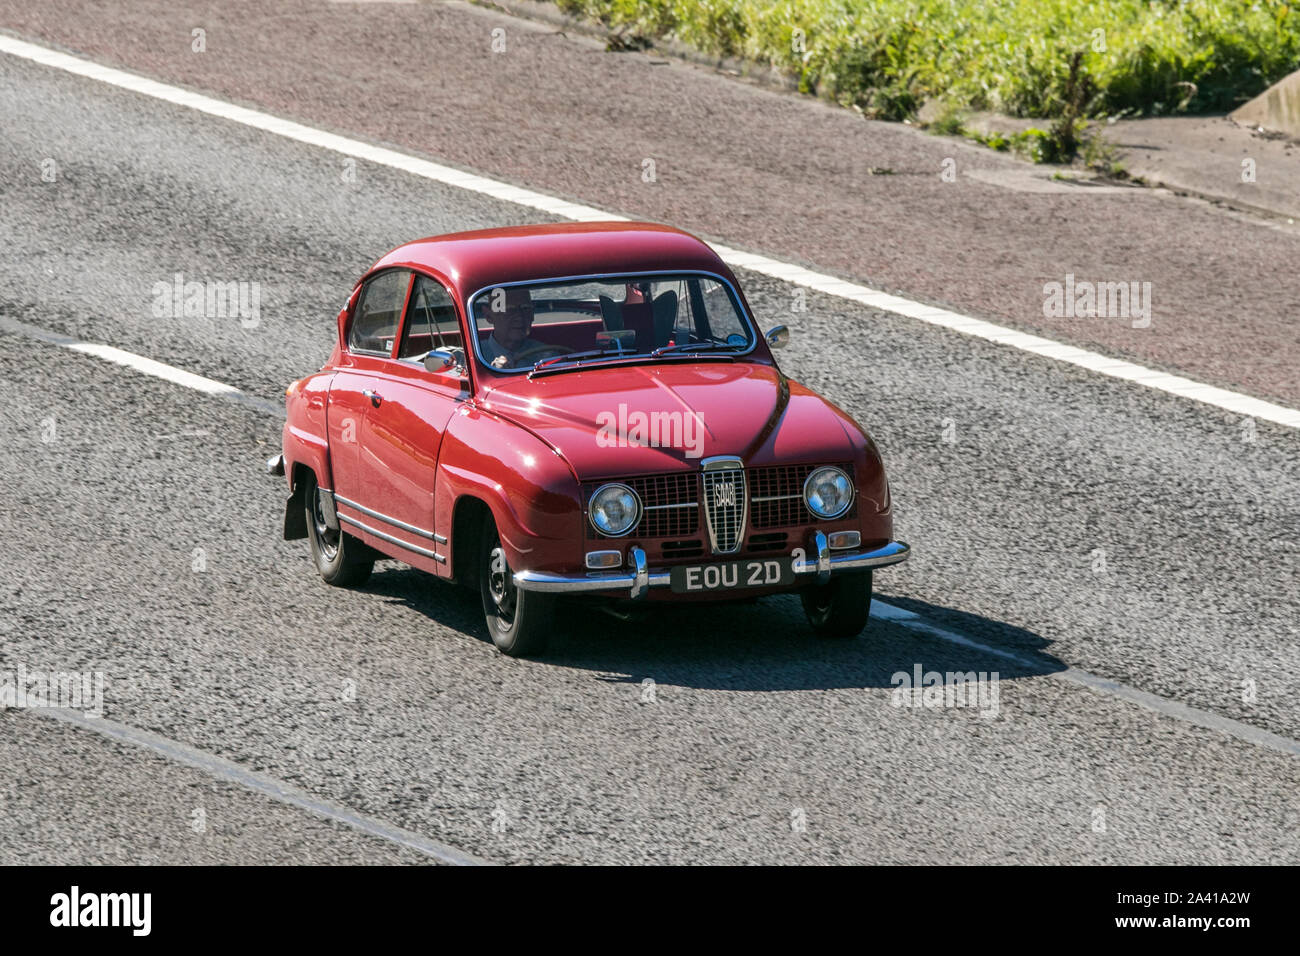 Saab 96 High Resolution Stock Photography and Images - Alamy